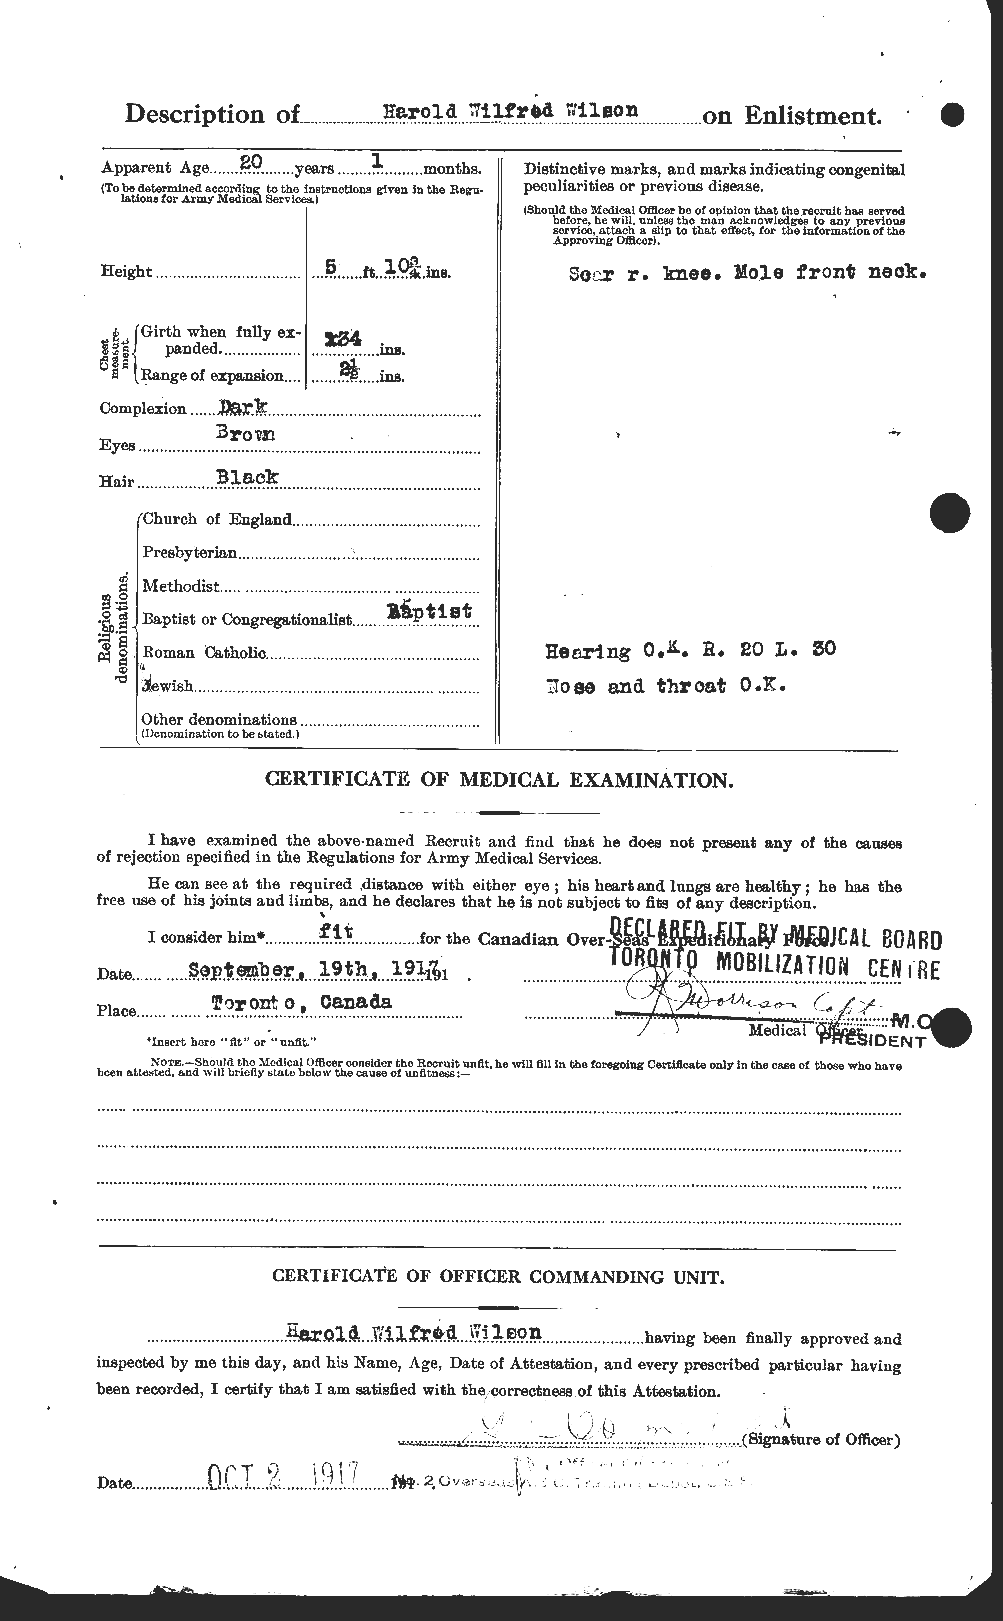 Personnel Records of the First World War - CEF 679418b